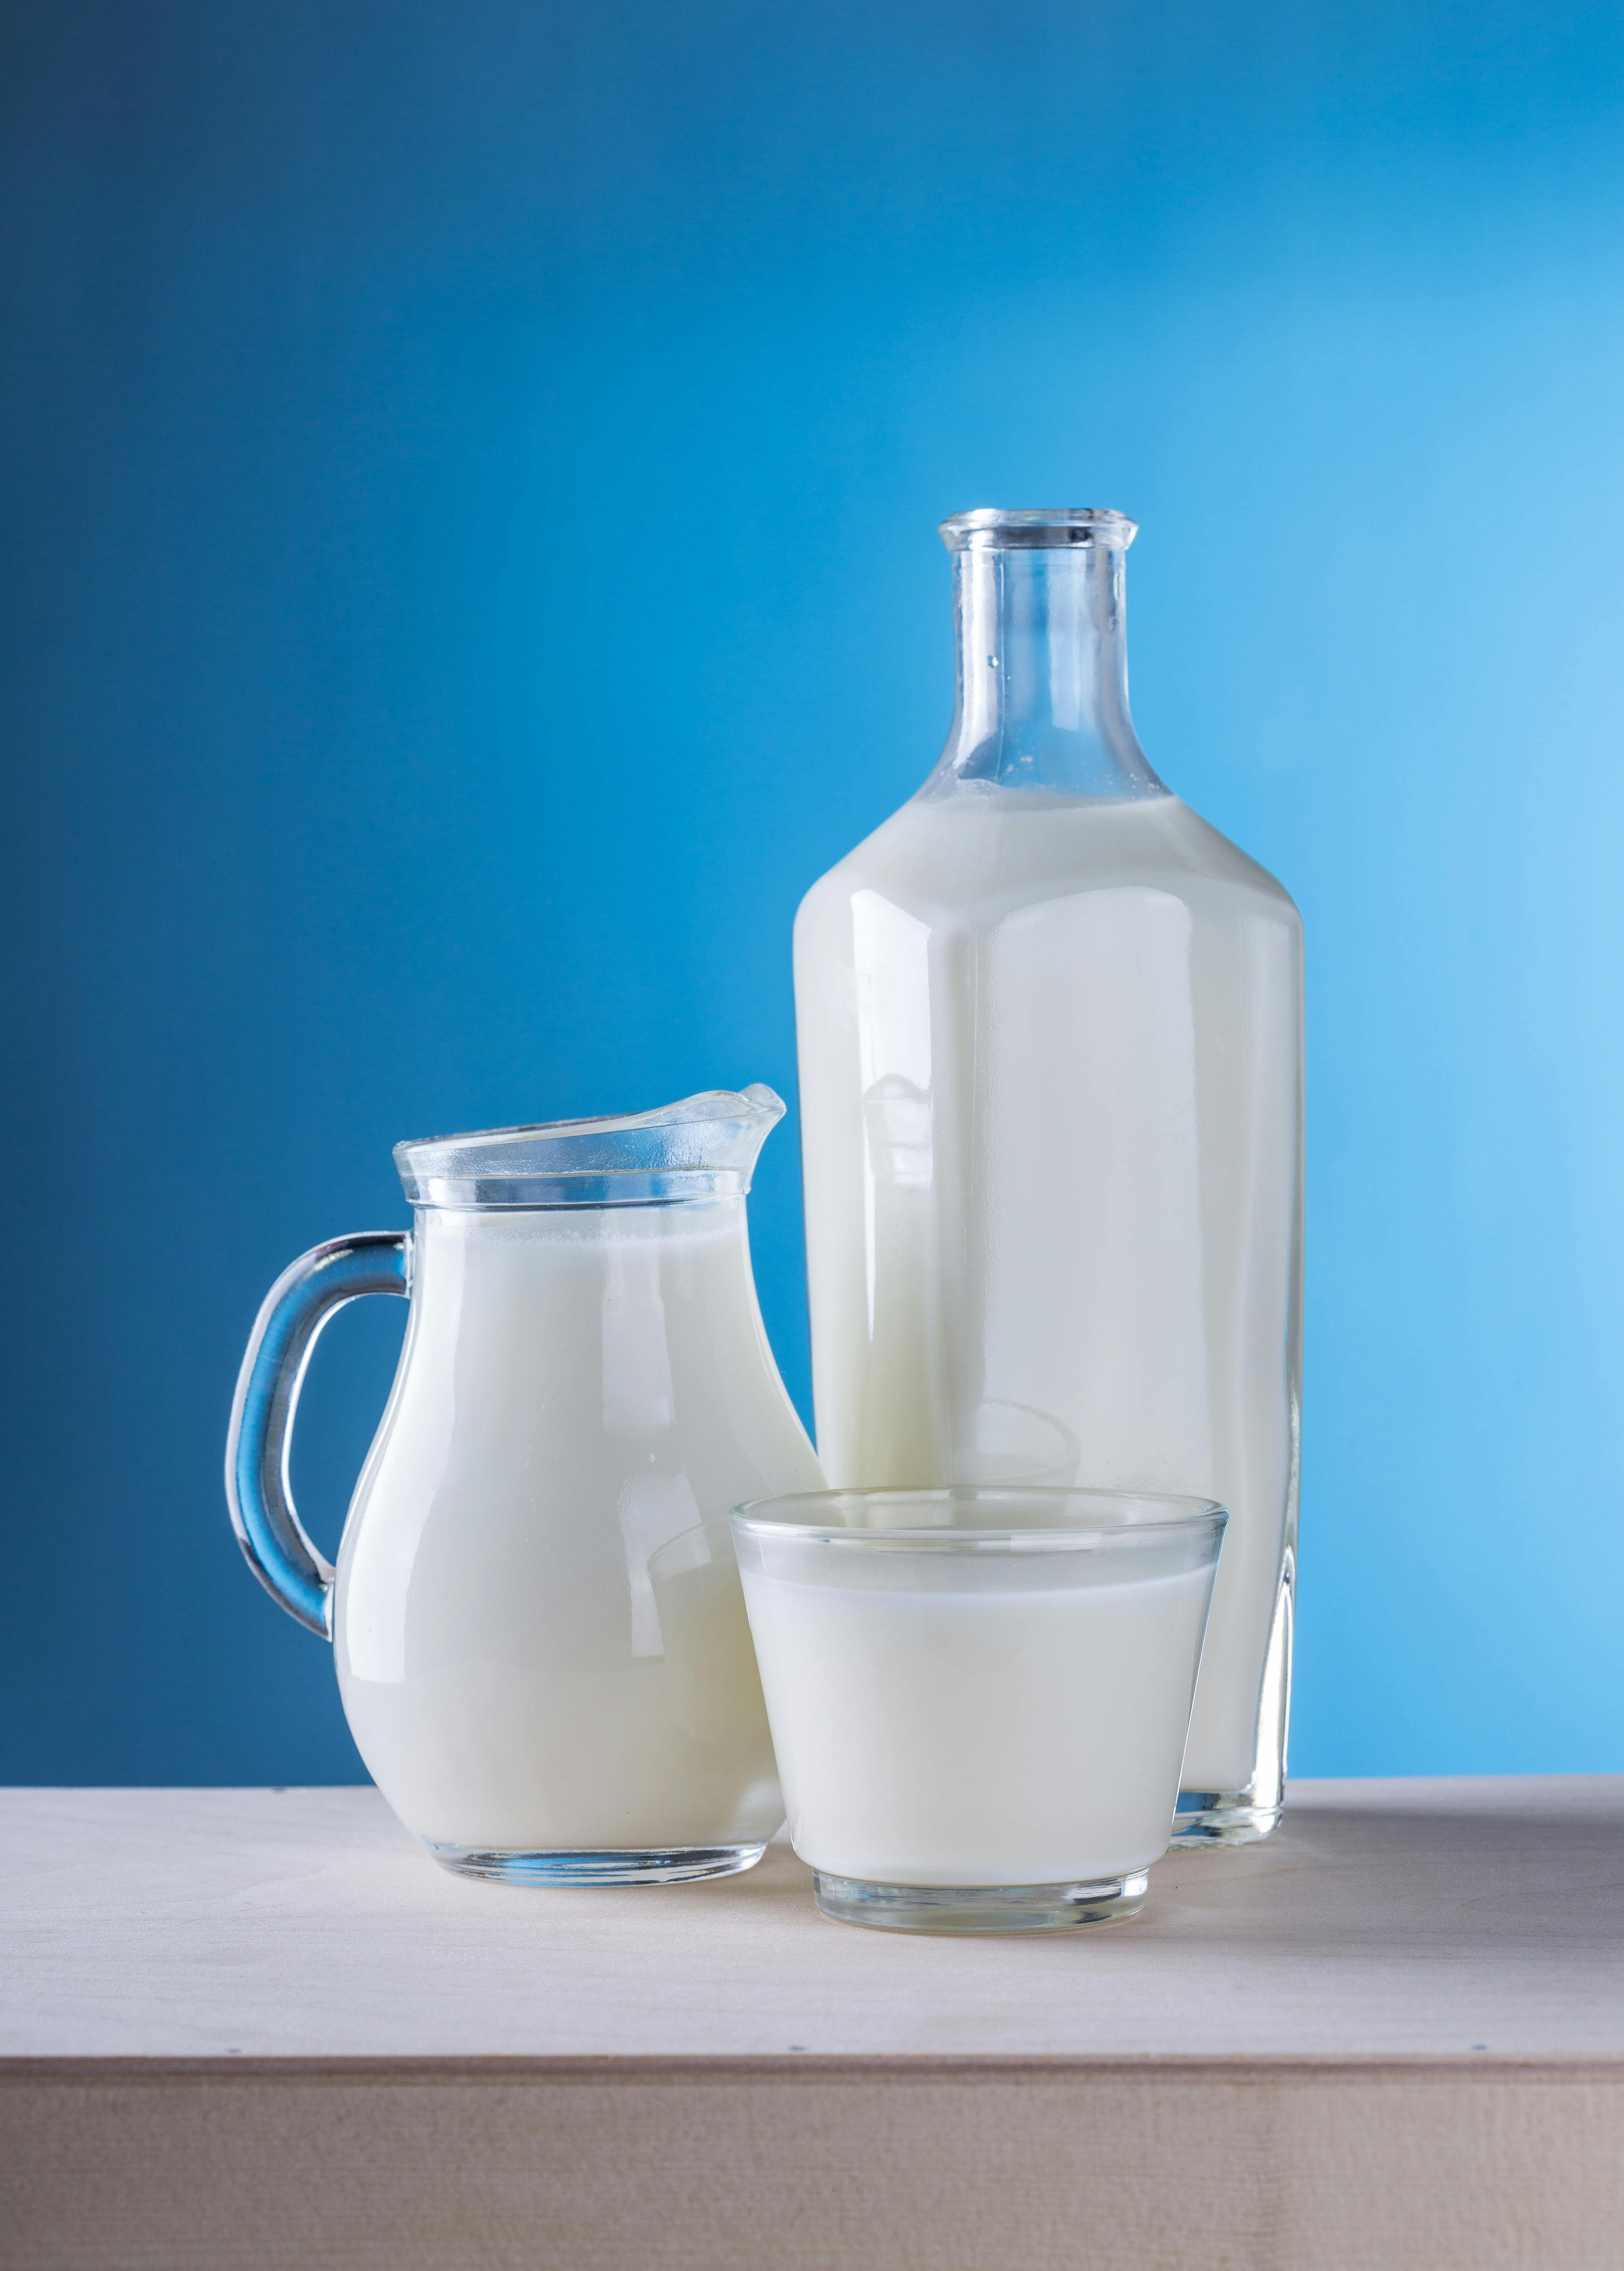 Close-up of Milk Against Blue Background · Free Stock Photo